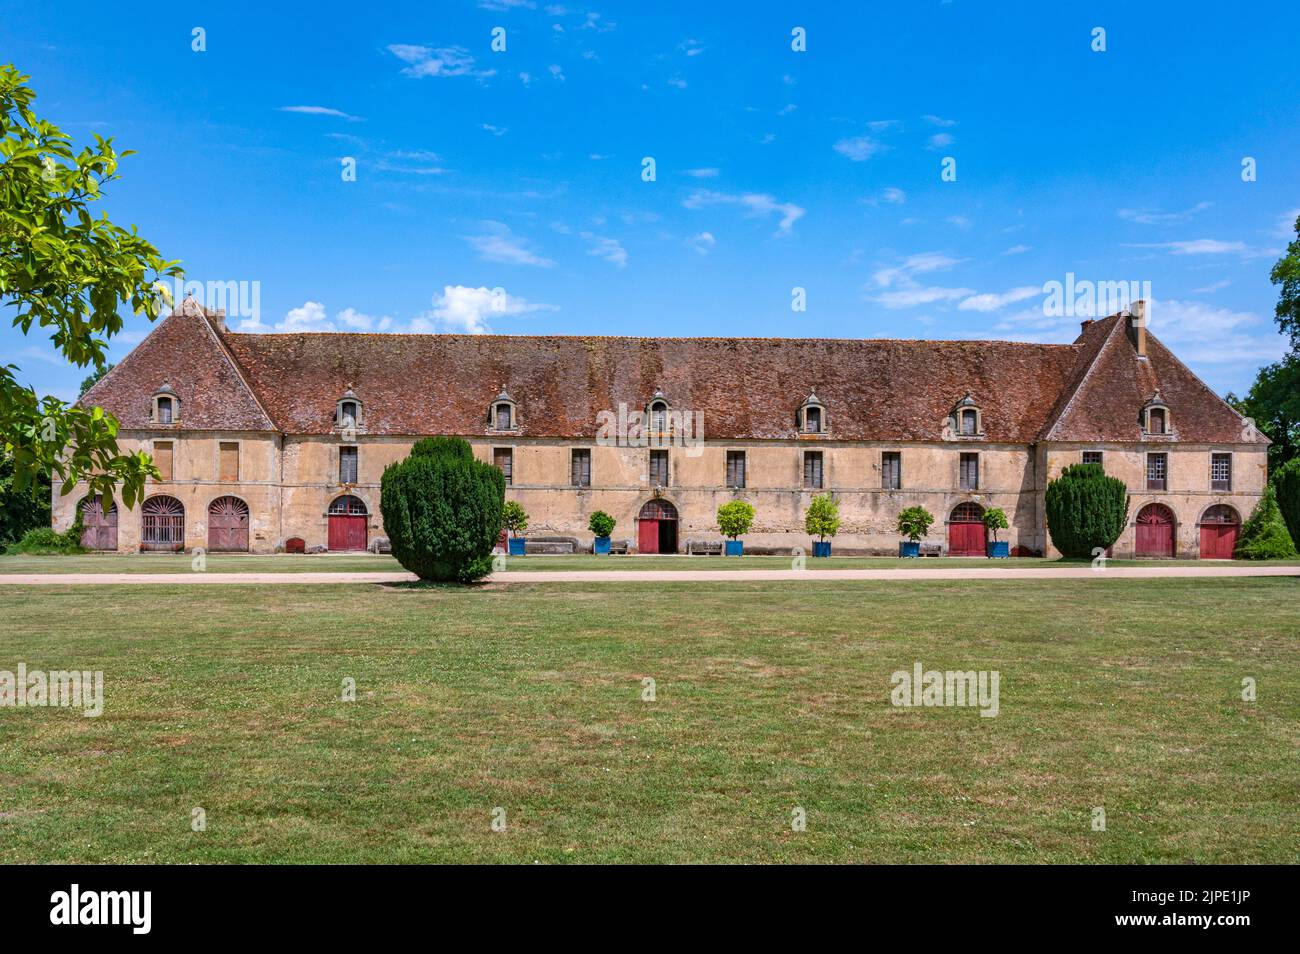 The  stables of the castle Château de Sully in Burgundy, France Stock Photo